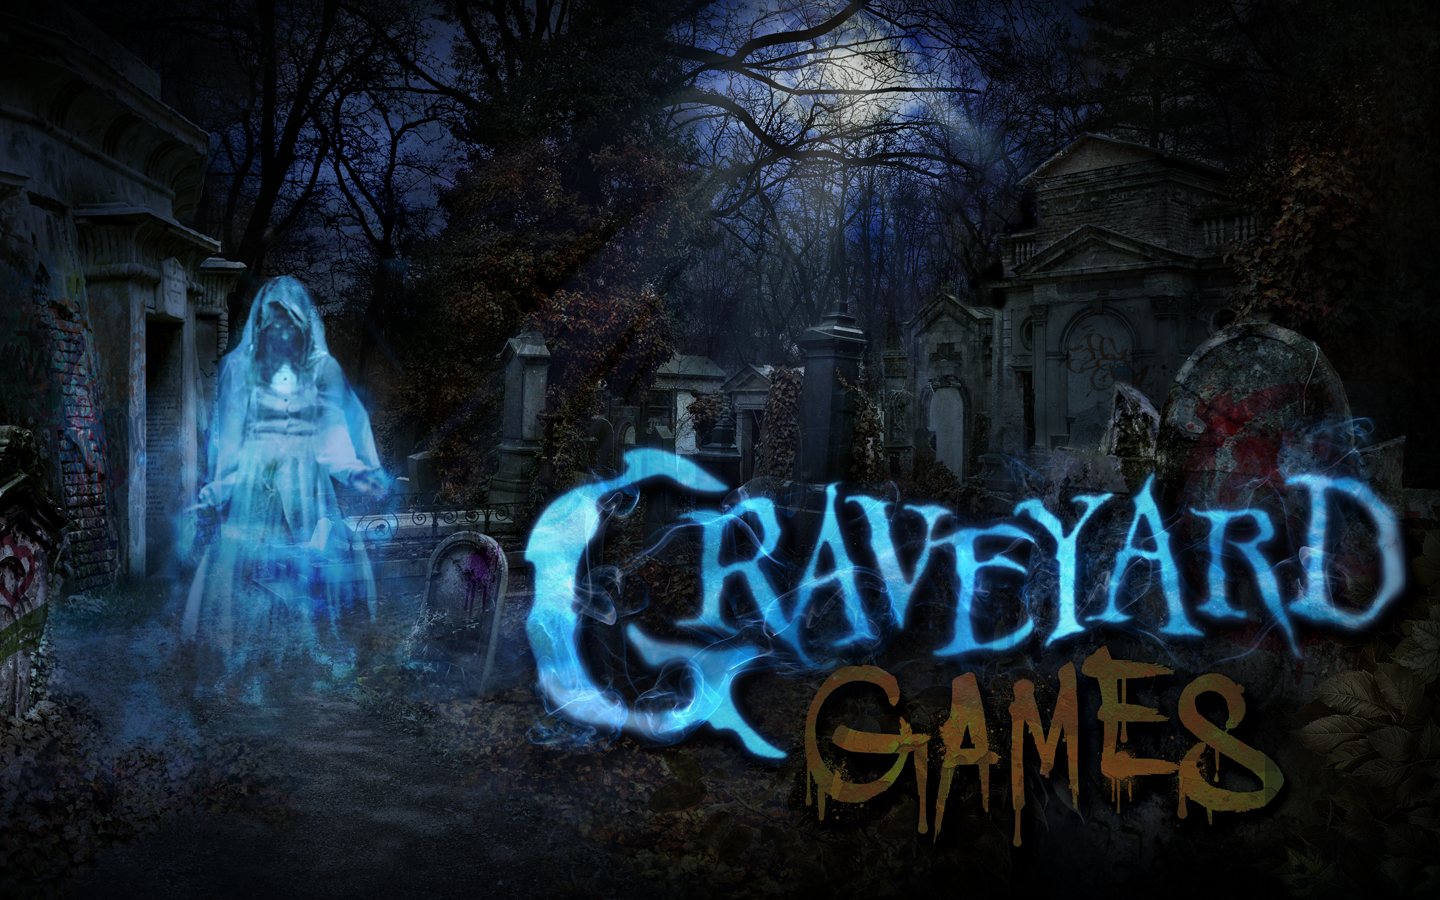 Graveyard Games is the final haunted house coming to Halloween Horror Nights 2019